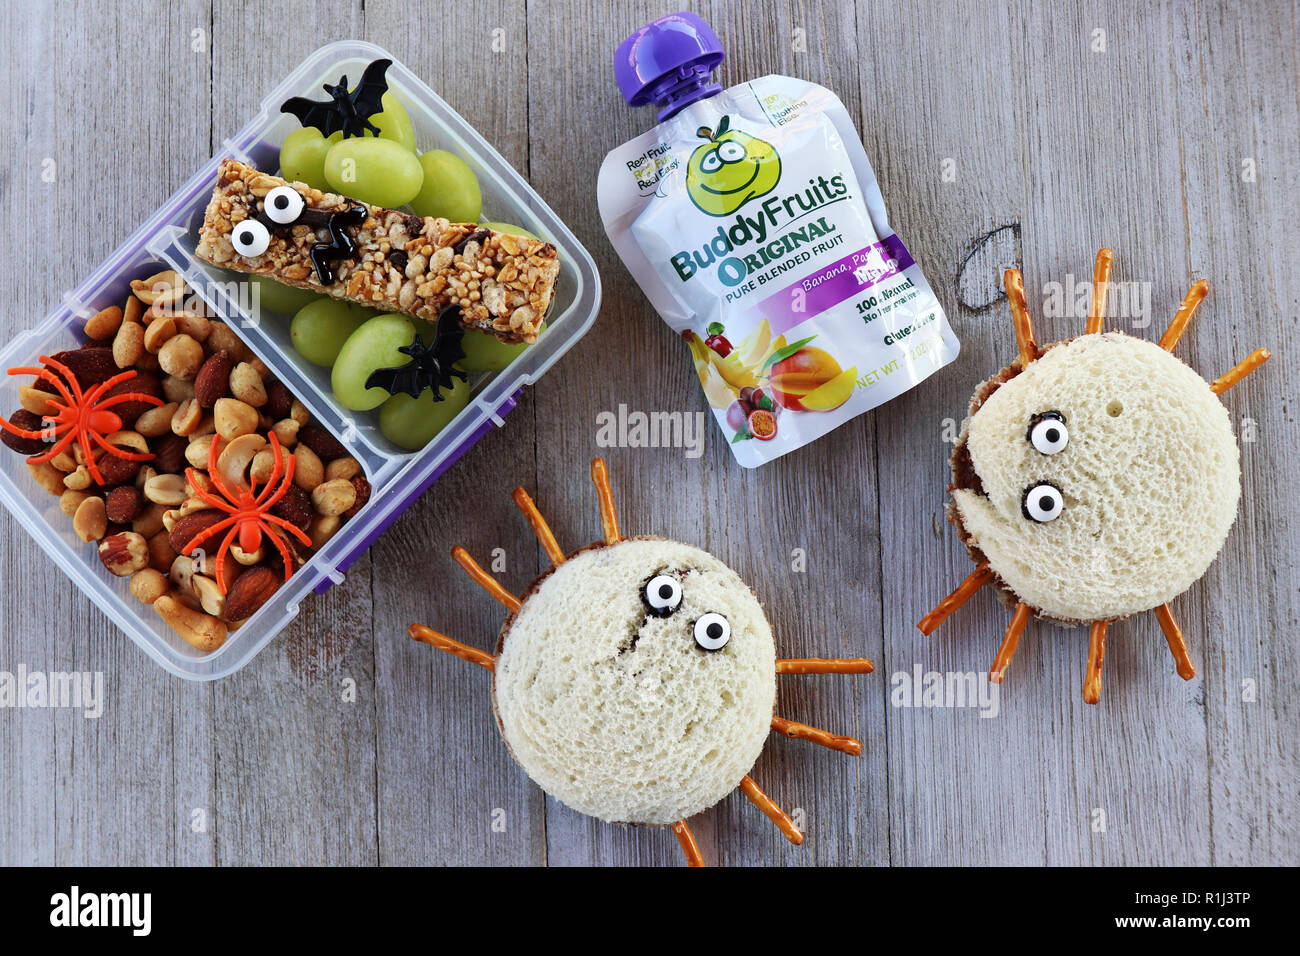 A spooky Halloween school lunch with Buddy Fruits Stock Photo